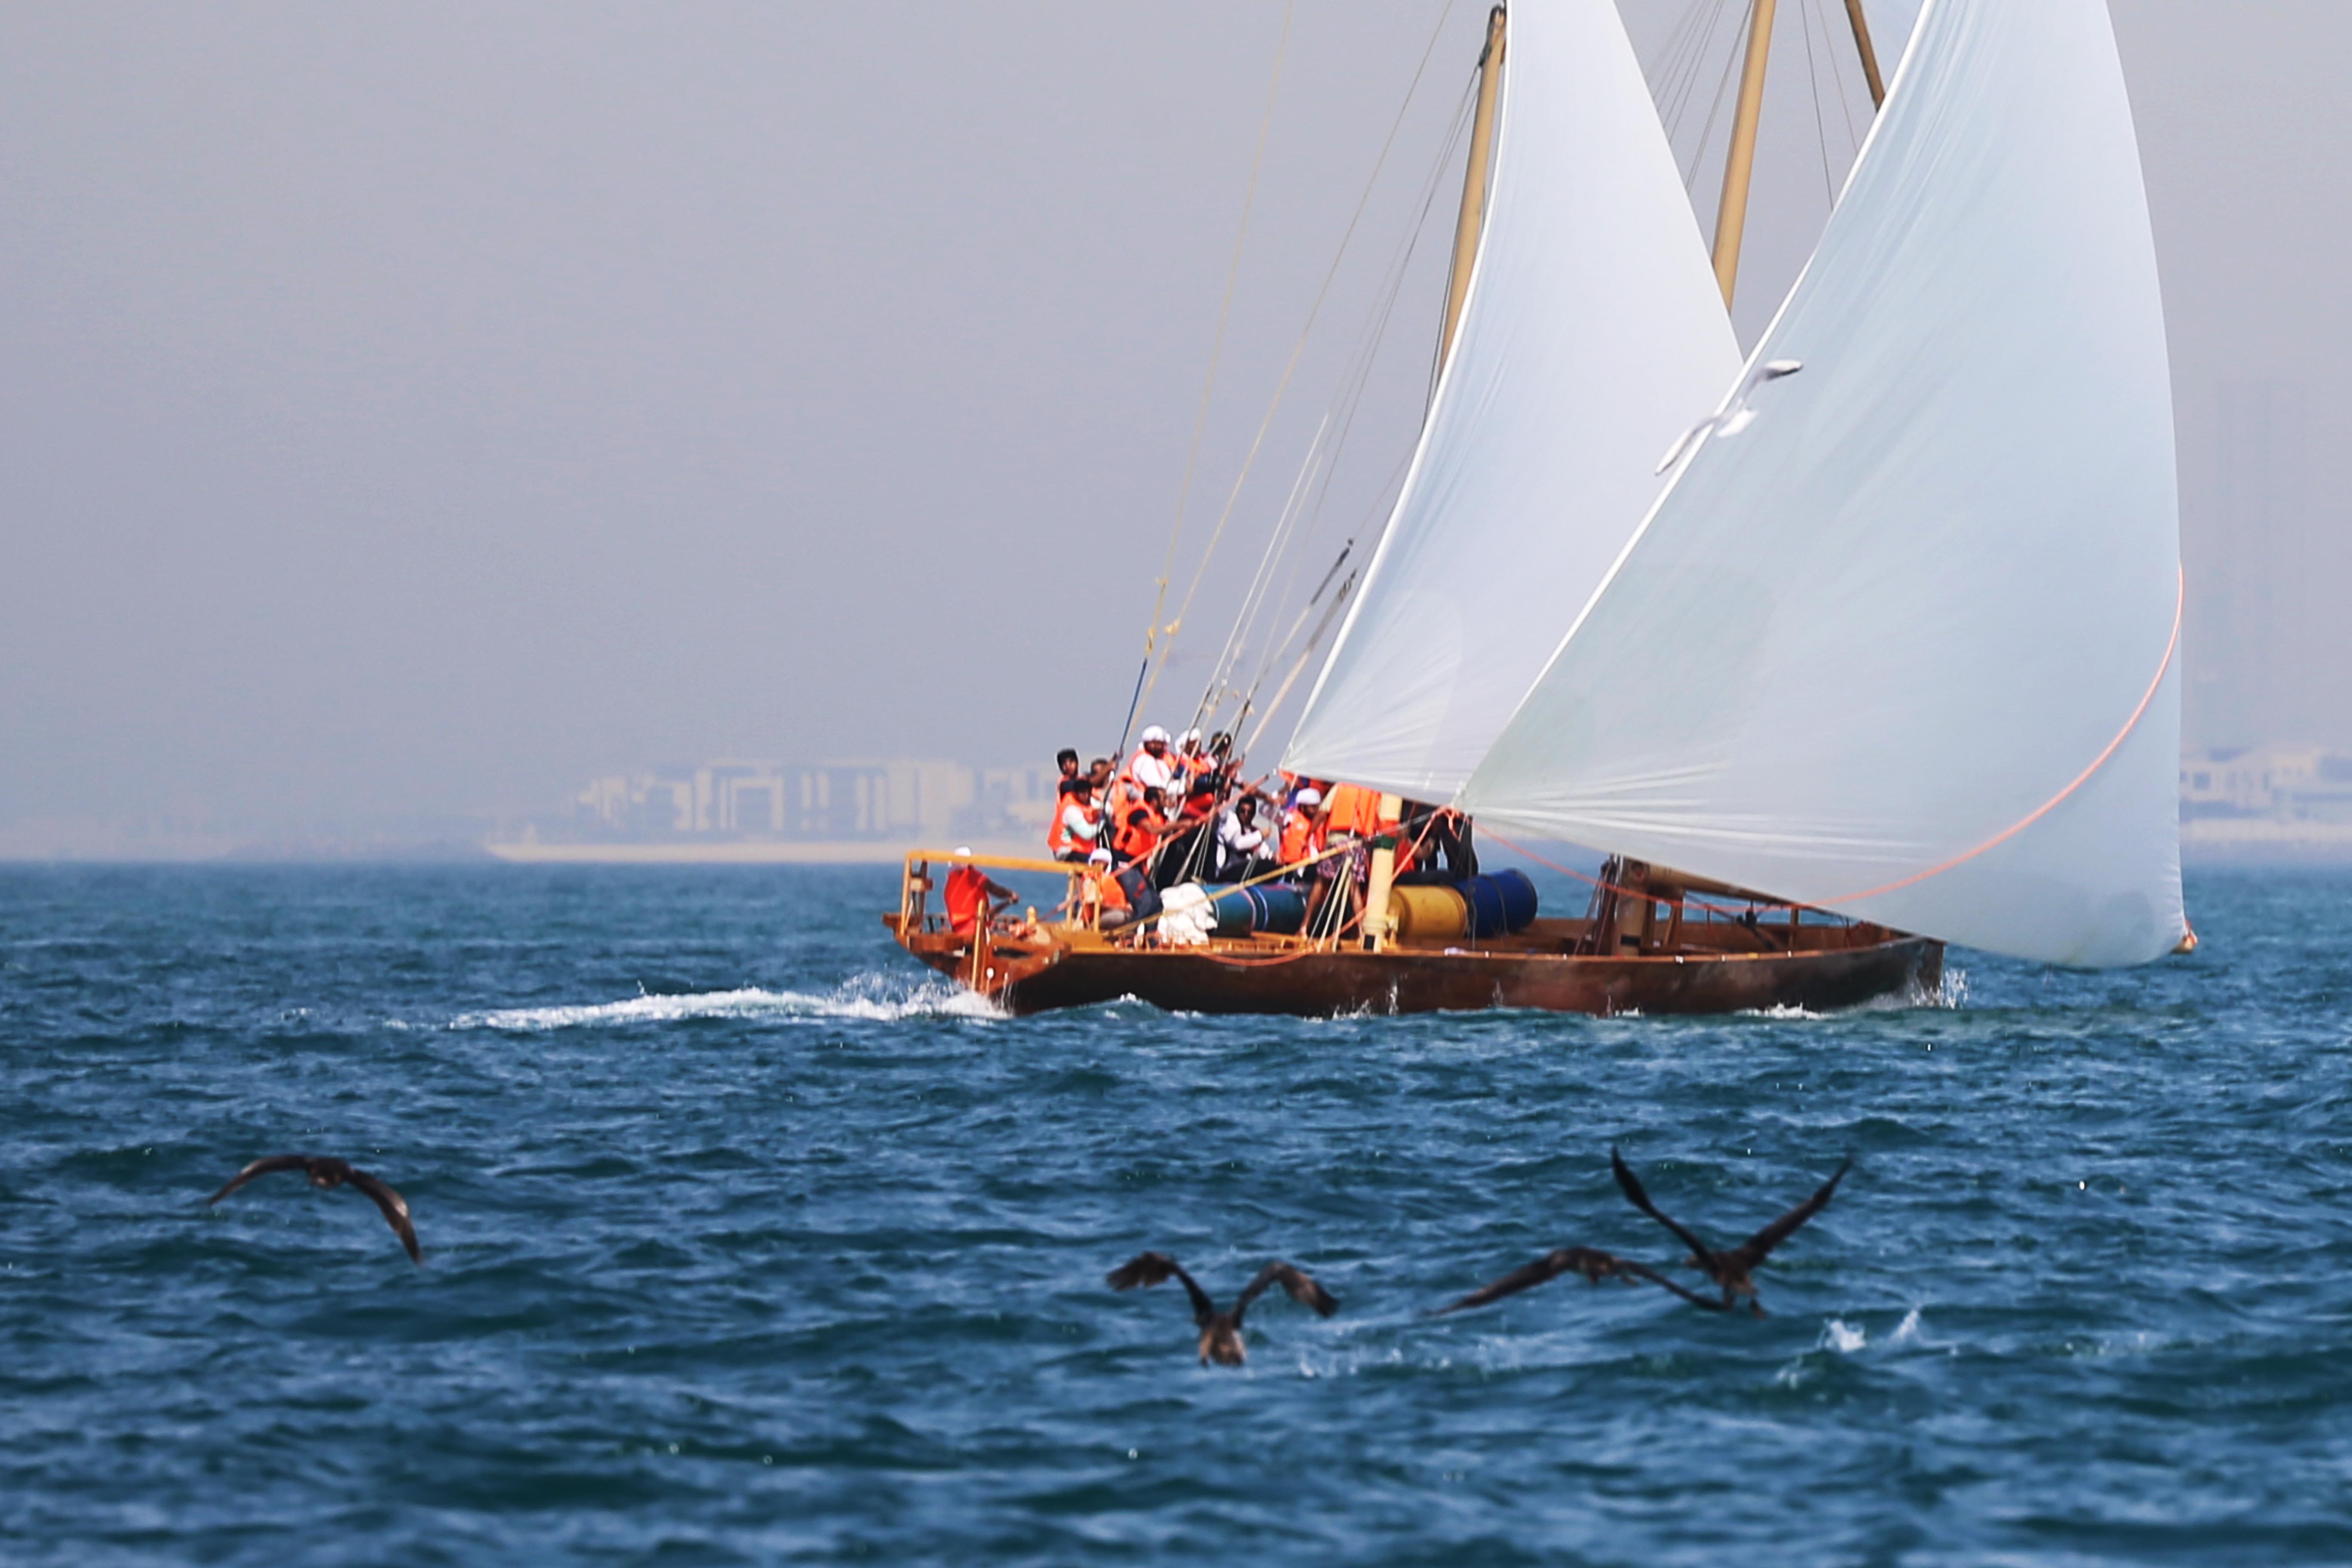 Change Date for the 60ft Dhow Sailing to Saturday